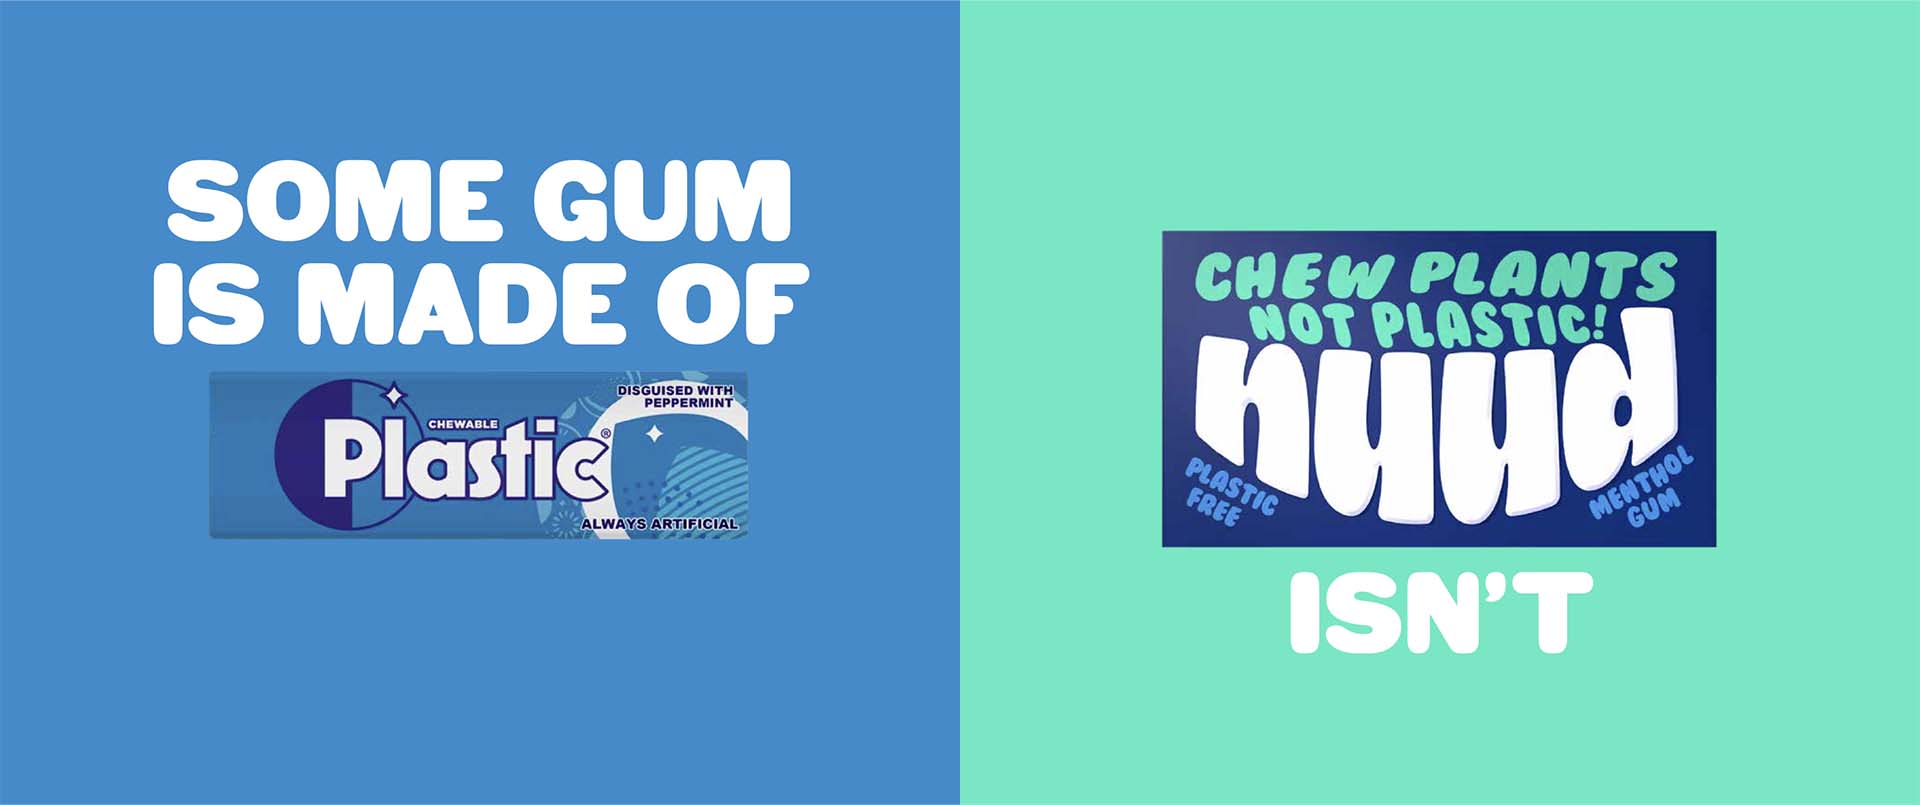 chewing gum contains plastic and nuud plastic free chewing gum